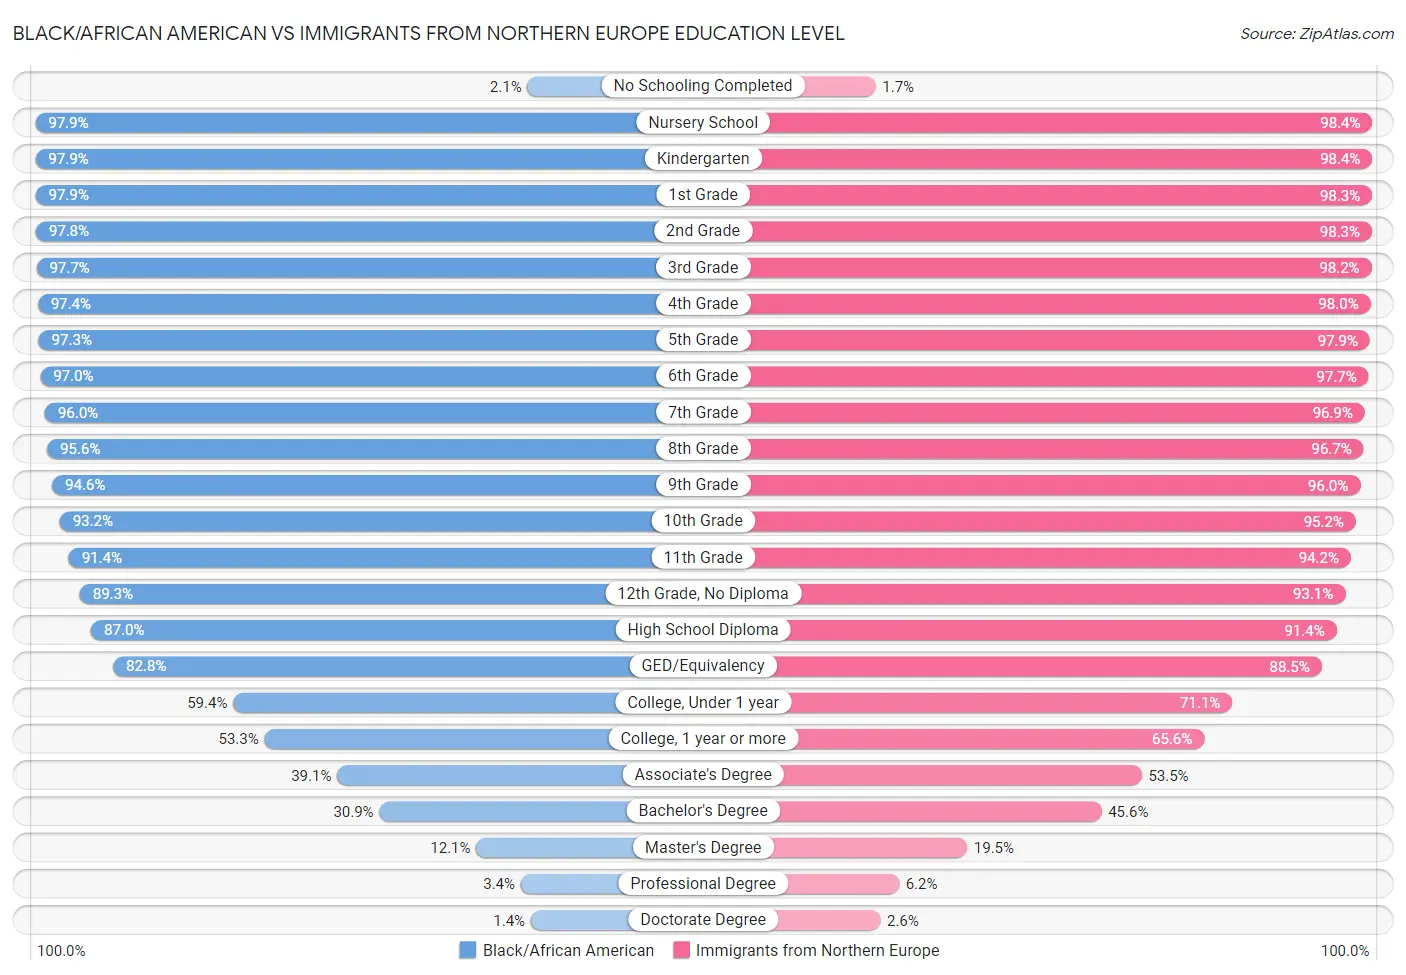 Black/African American vs Immigrants from Northern Europe Education Level